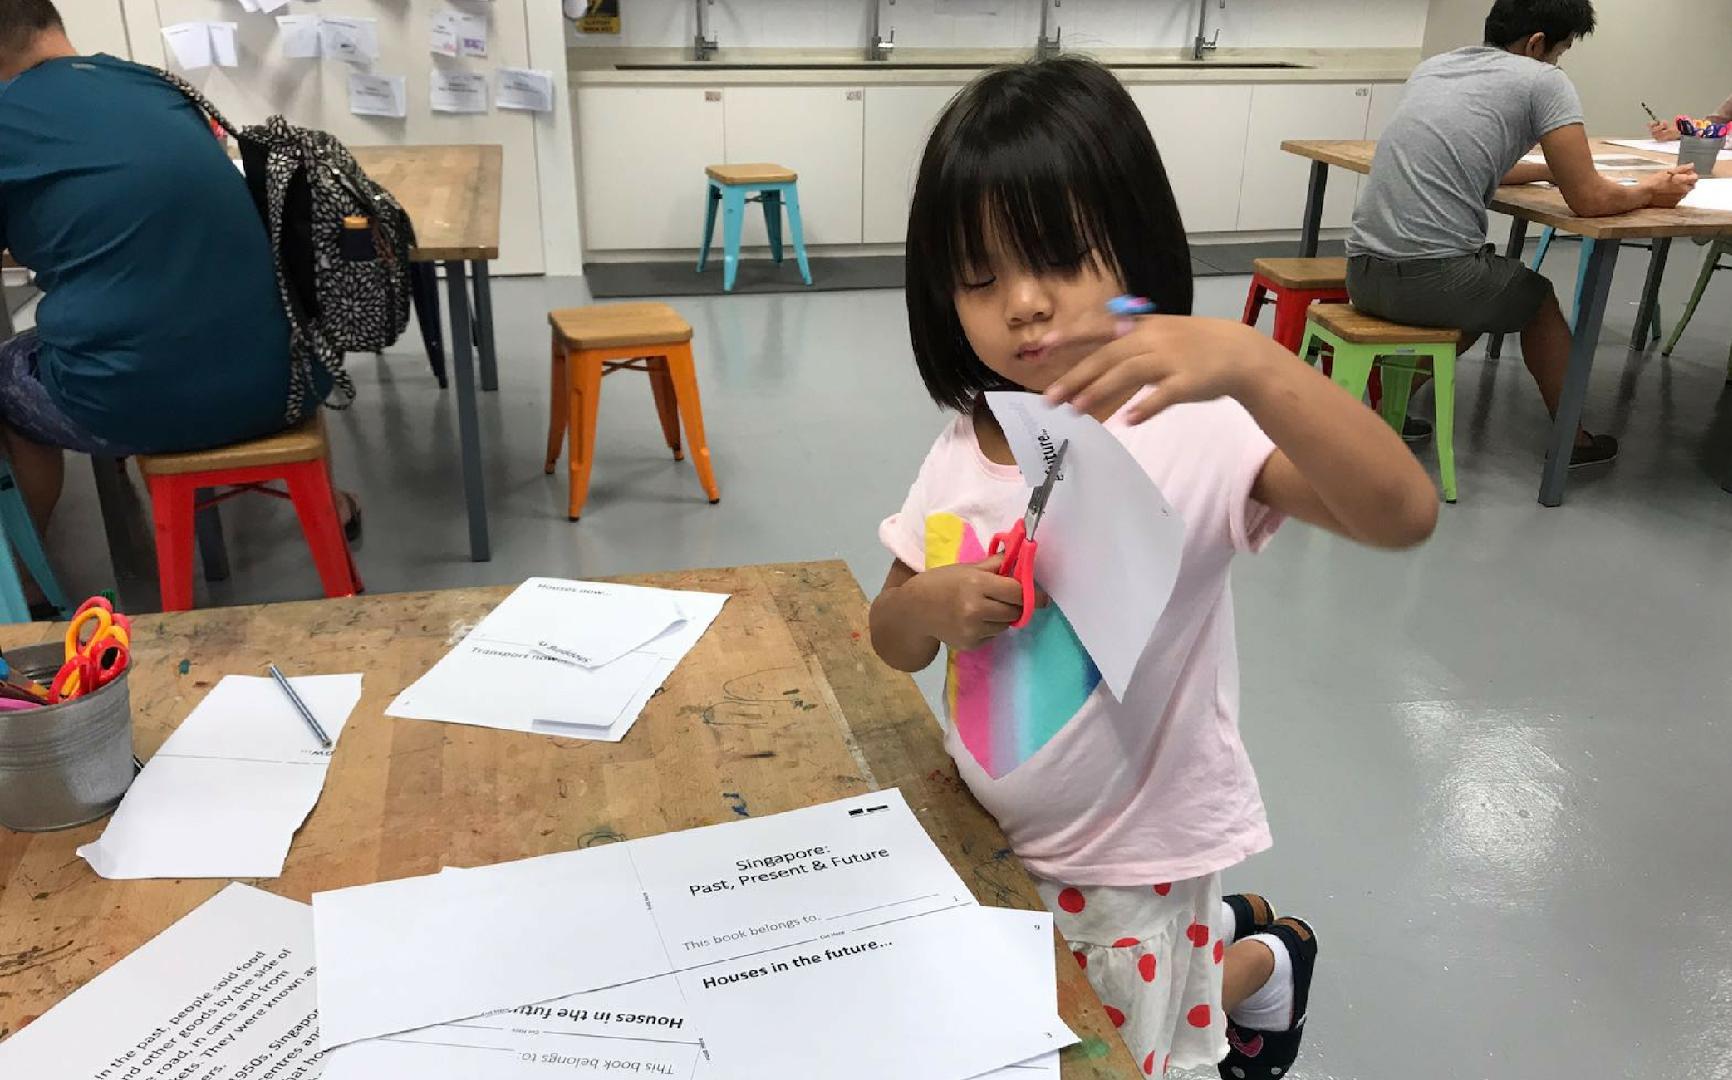  Celebrate the Lunar New Year, also known as the Spring Festival, by creating floral collages inspired by ink artworks in DBS Singapore Gallery 2. Ages 4 and above. No registration required. 